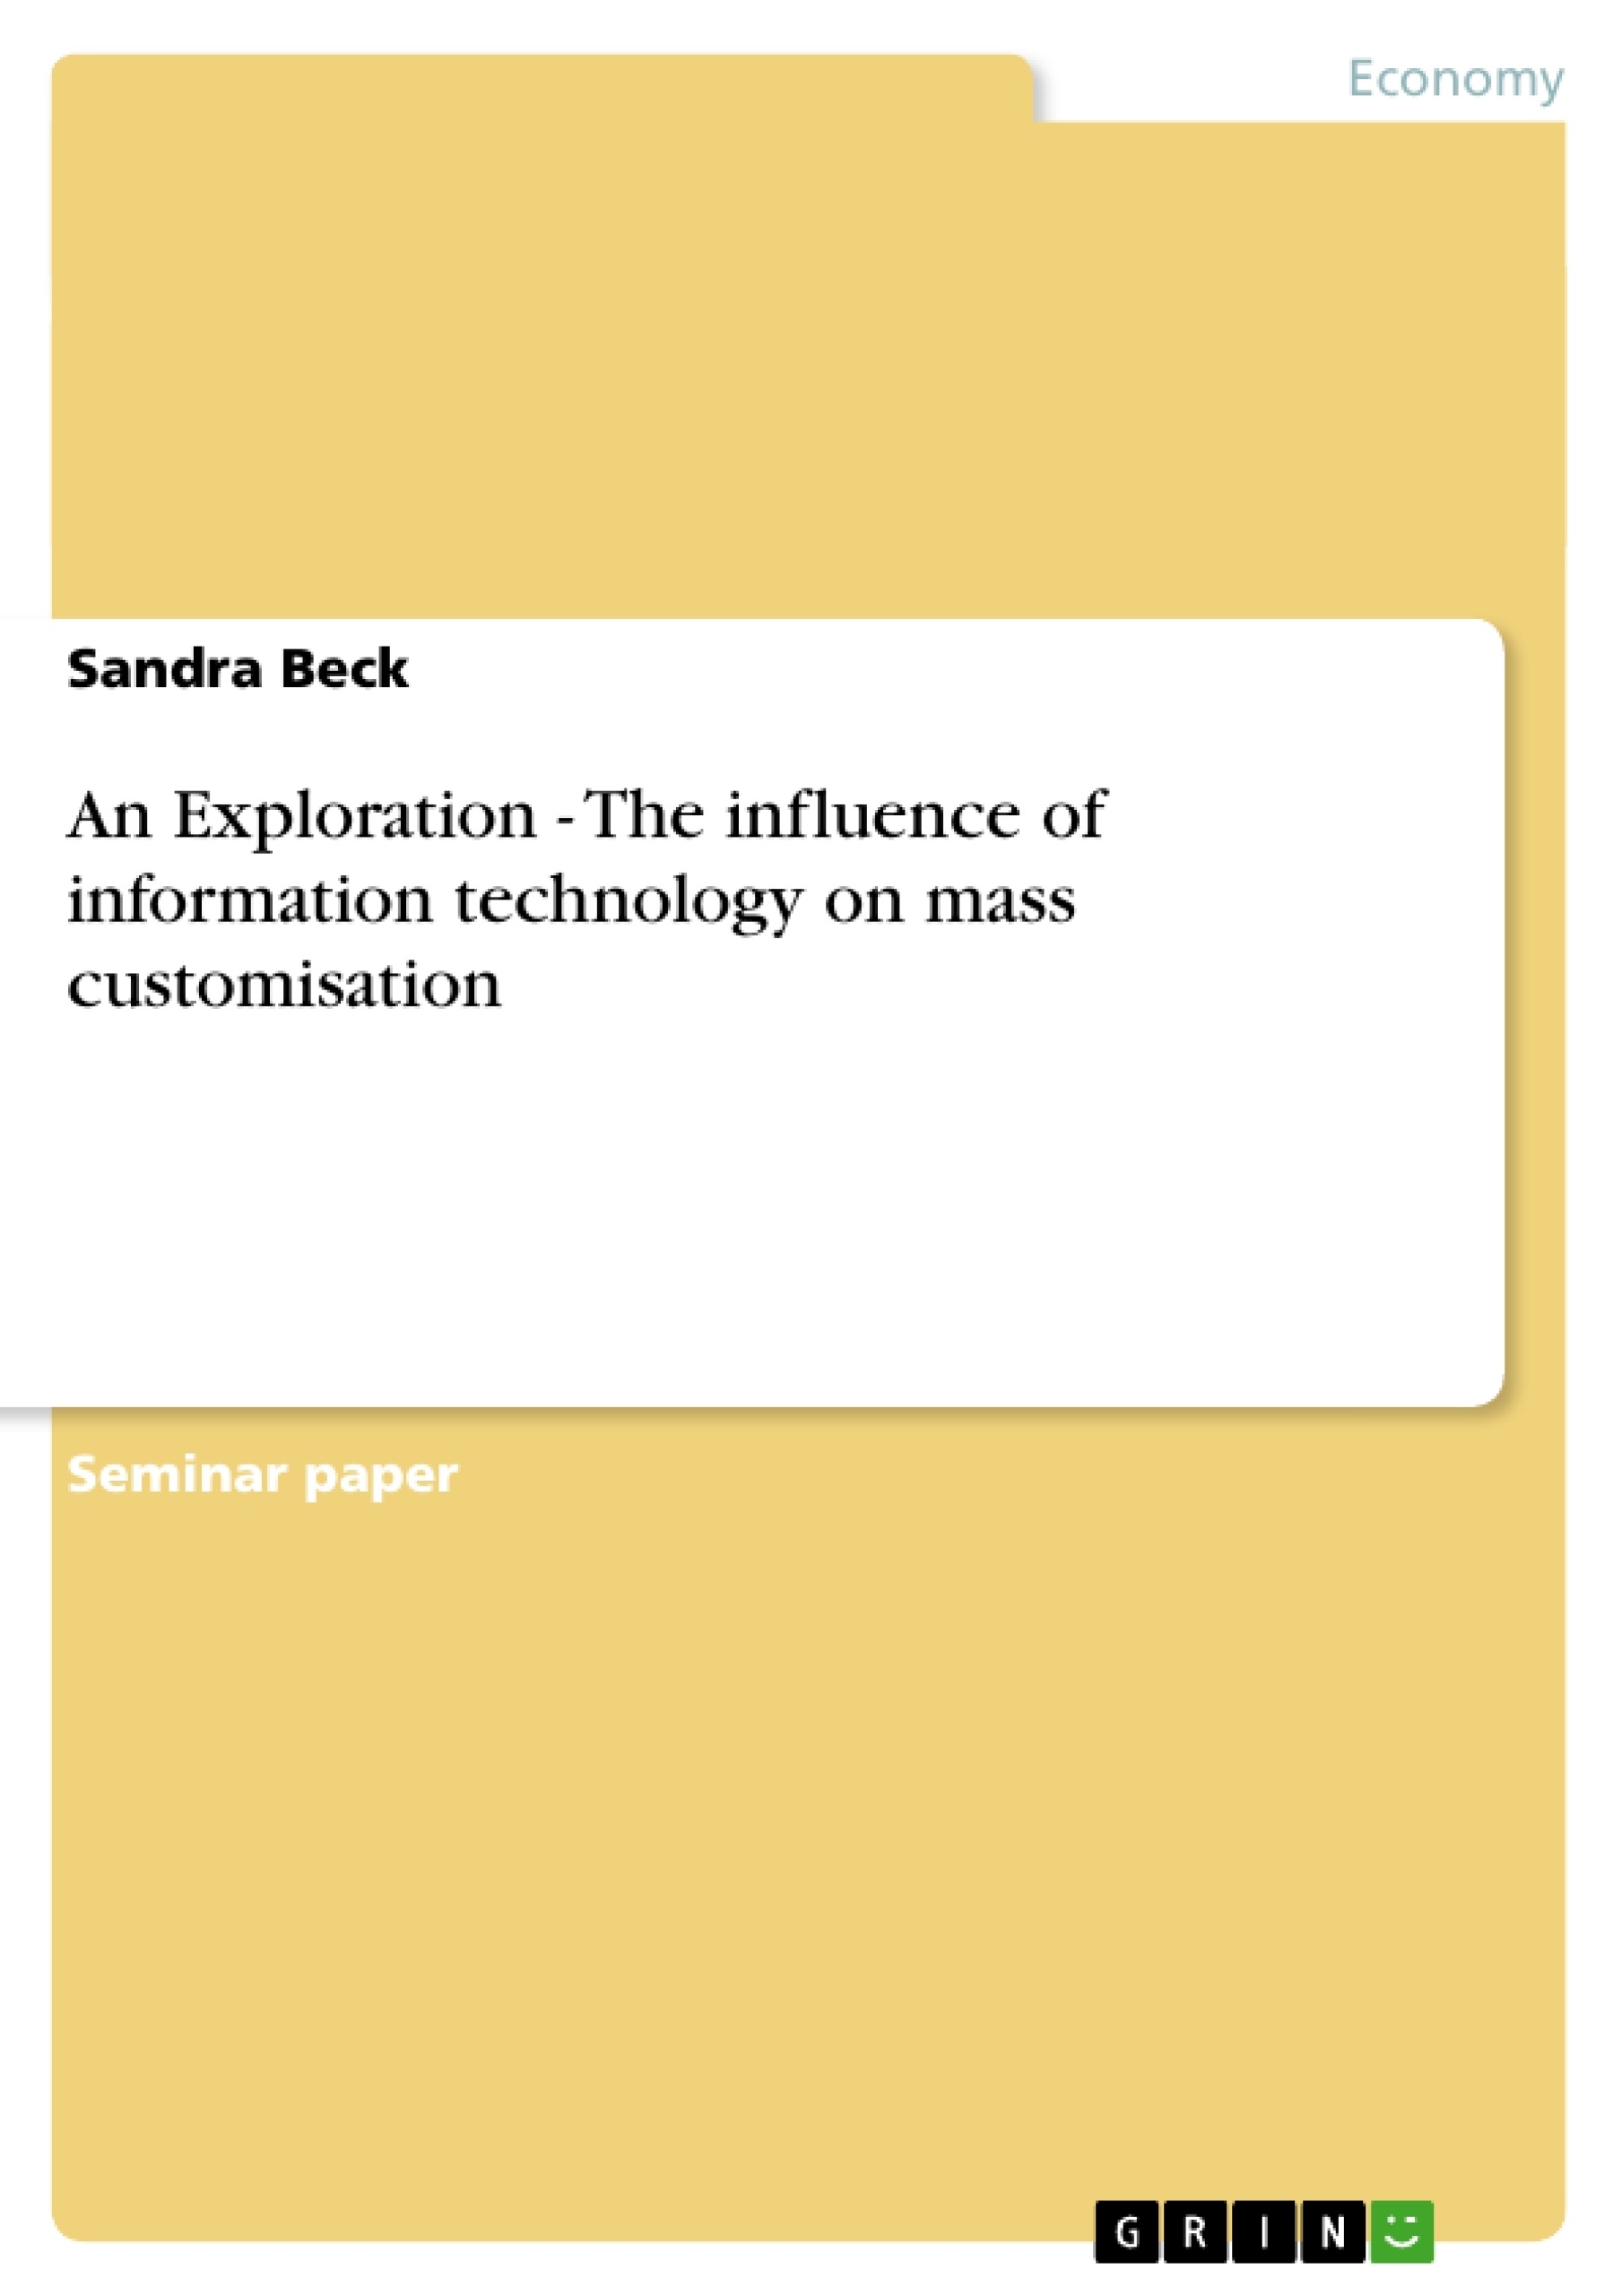 Title: An Exploration - The influence of information technology on mass customisation